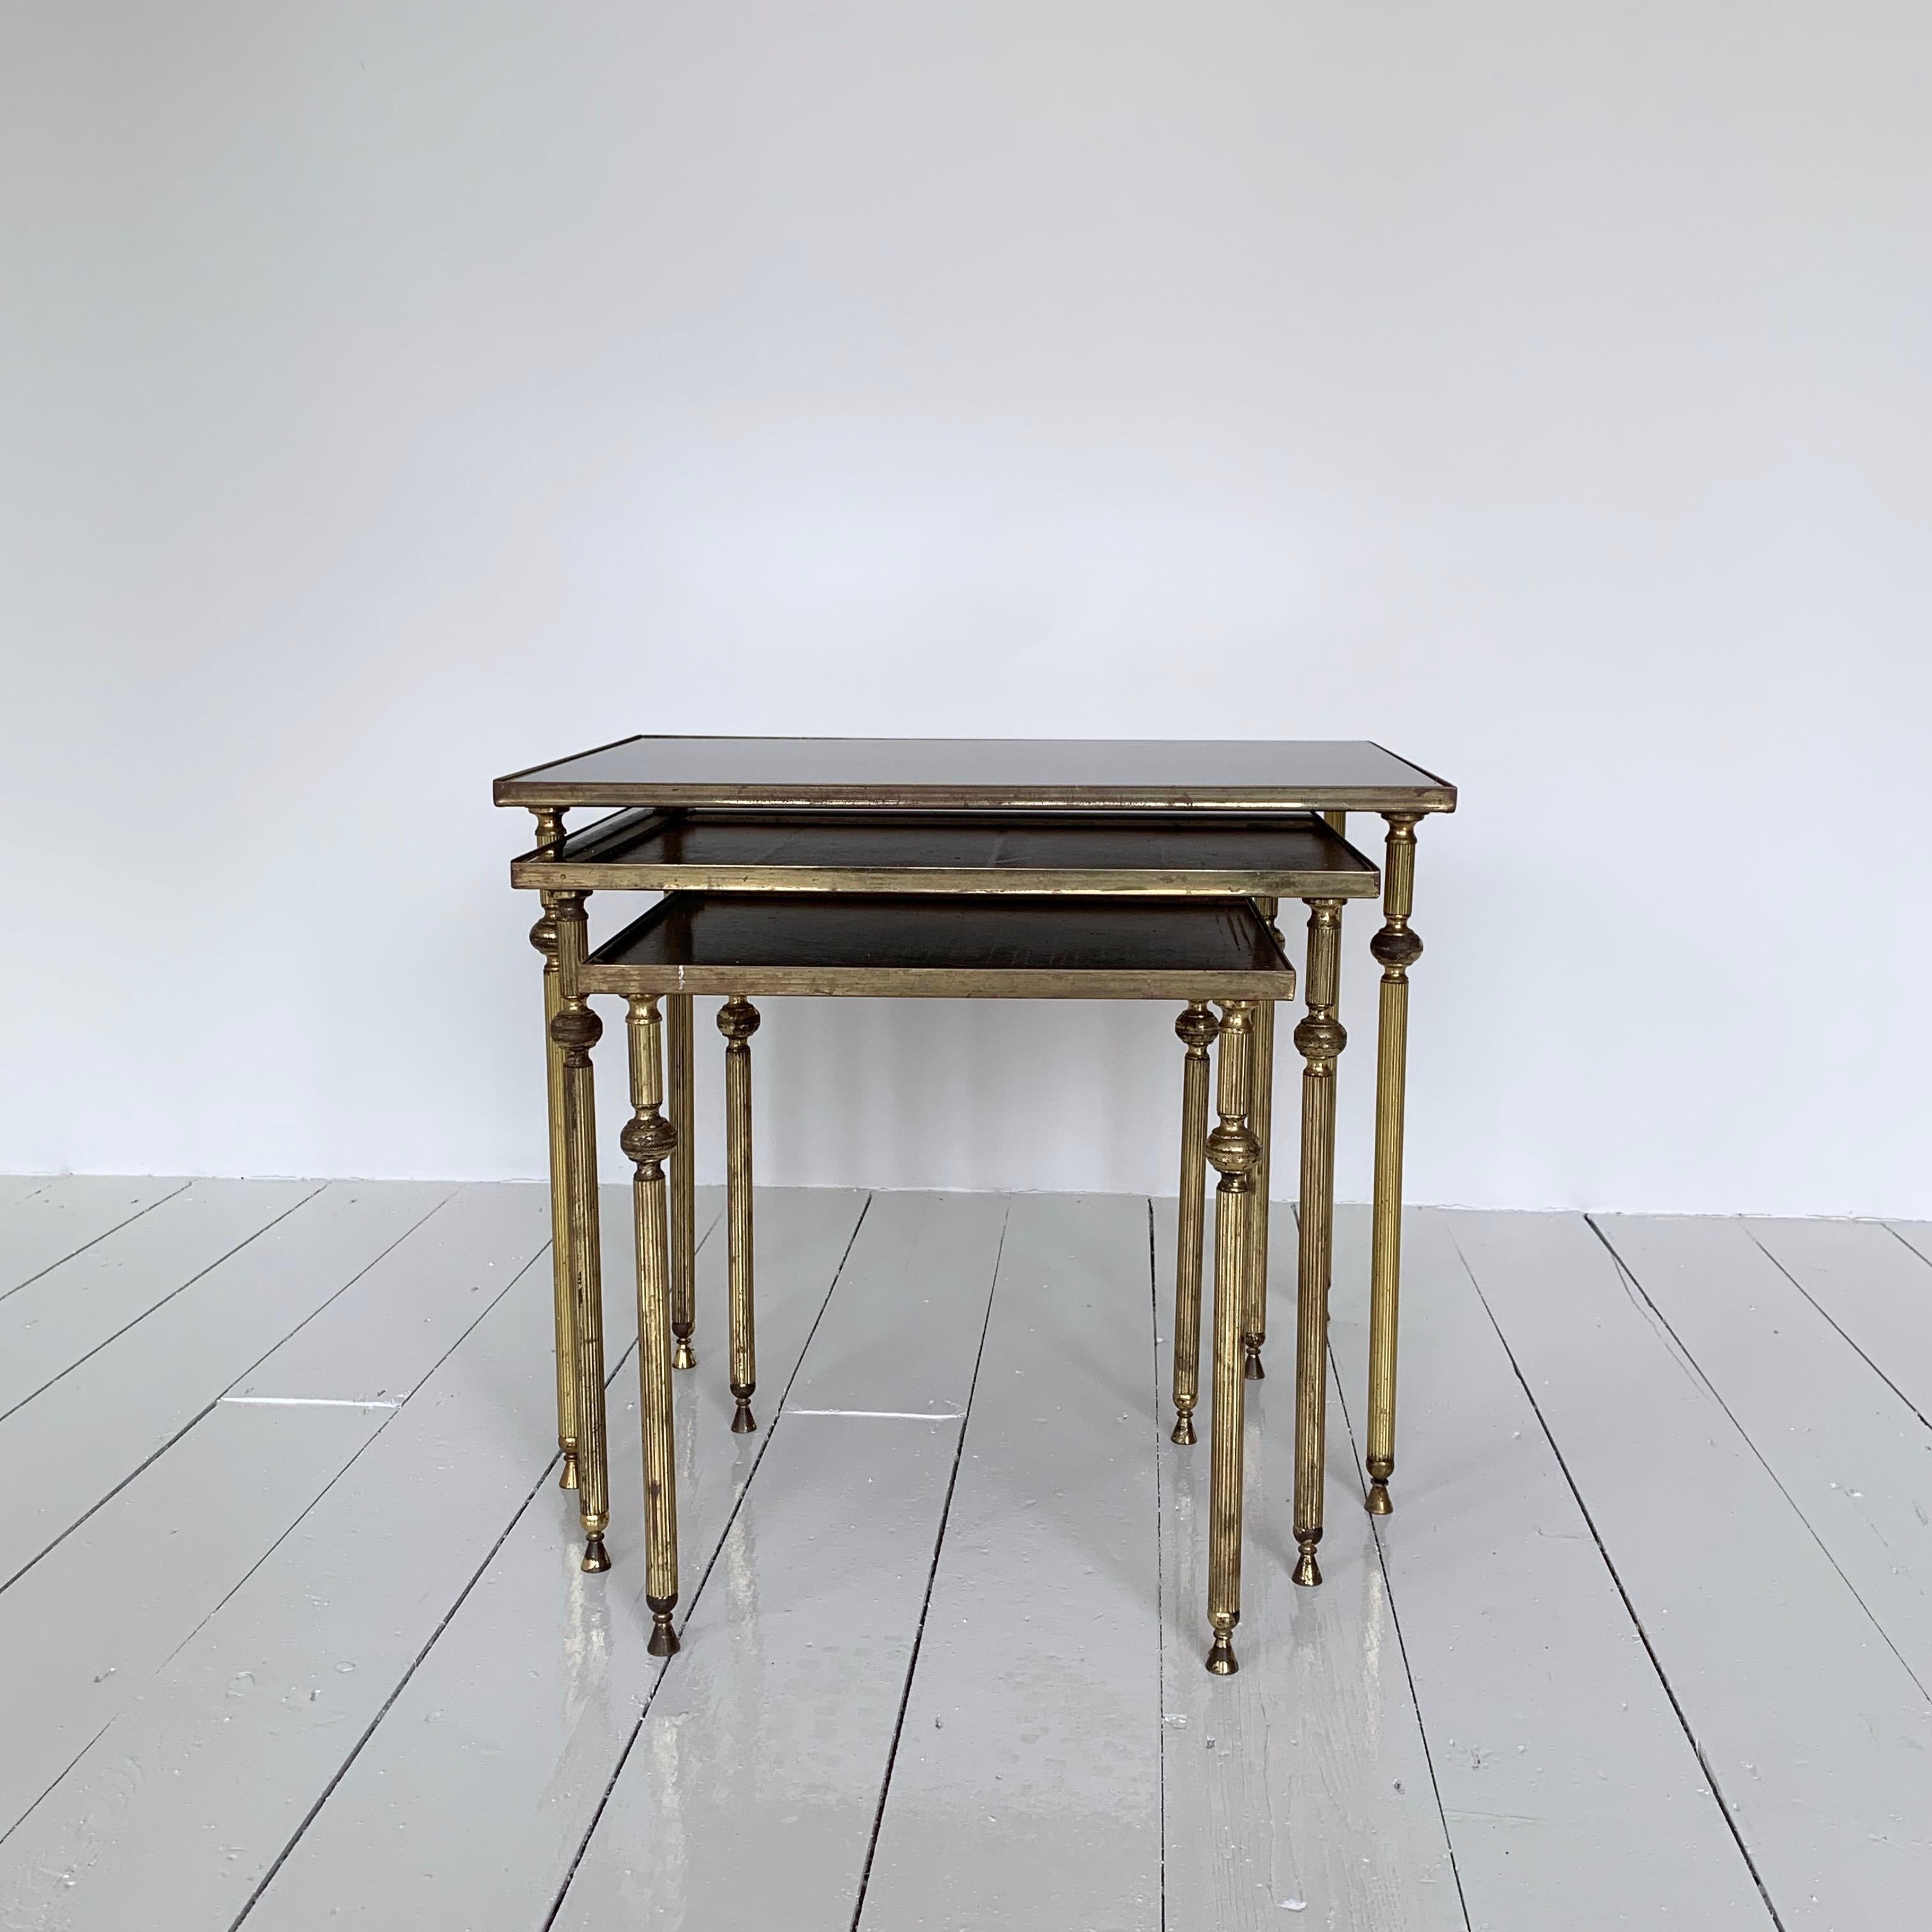 A nest of three side tables made from cast brass with black tinted mirrored glass tops. In the style of Maison Baguès these tables originate from 1950s France. All three are in excellent condition. Slight ageing to the mirrored glass can be seen in